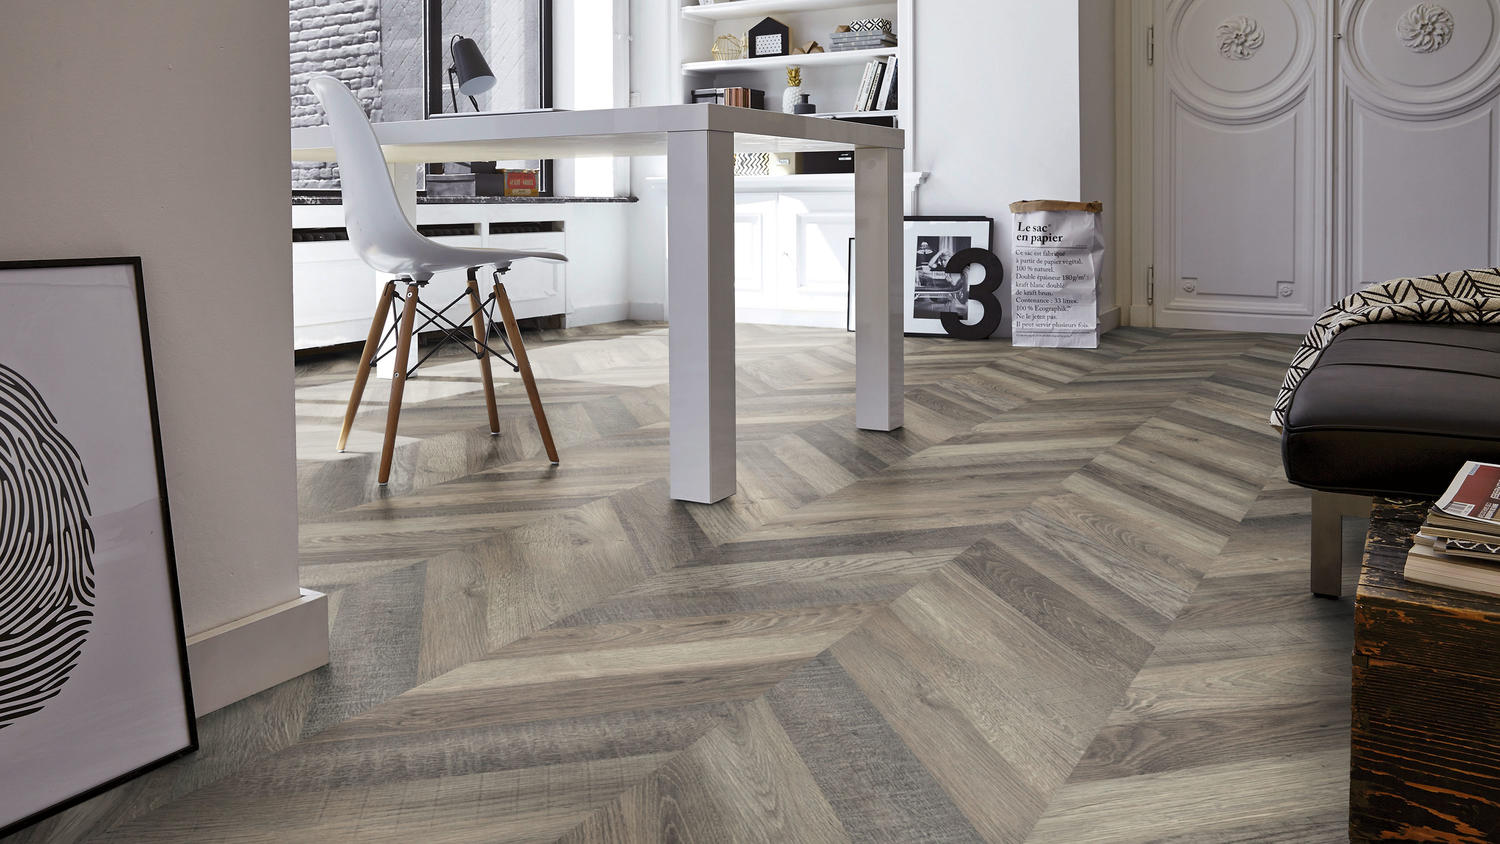 Best Flooring For A Home Office, Which Floor Tiles Are Warmest